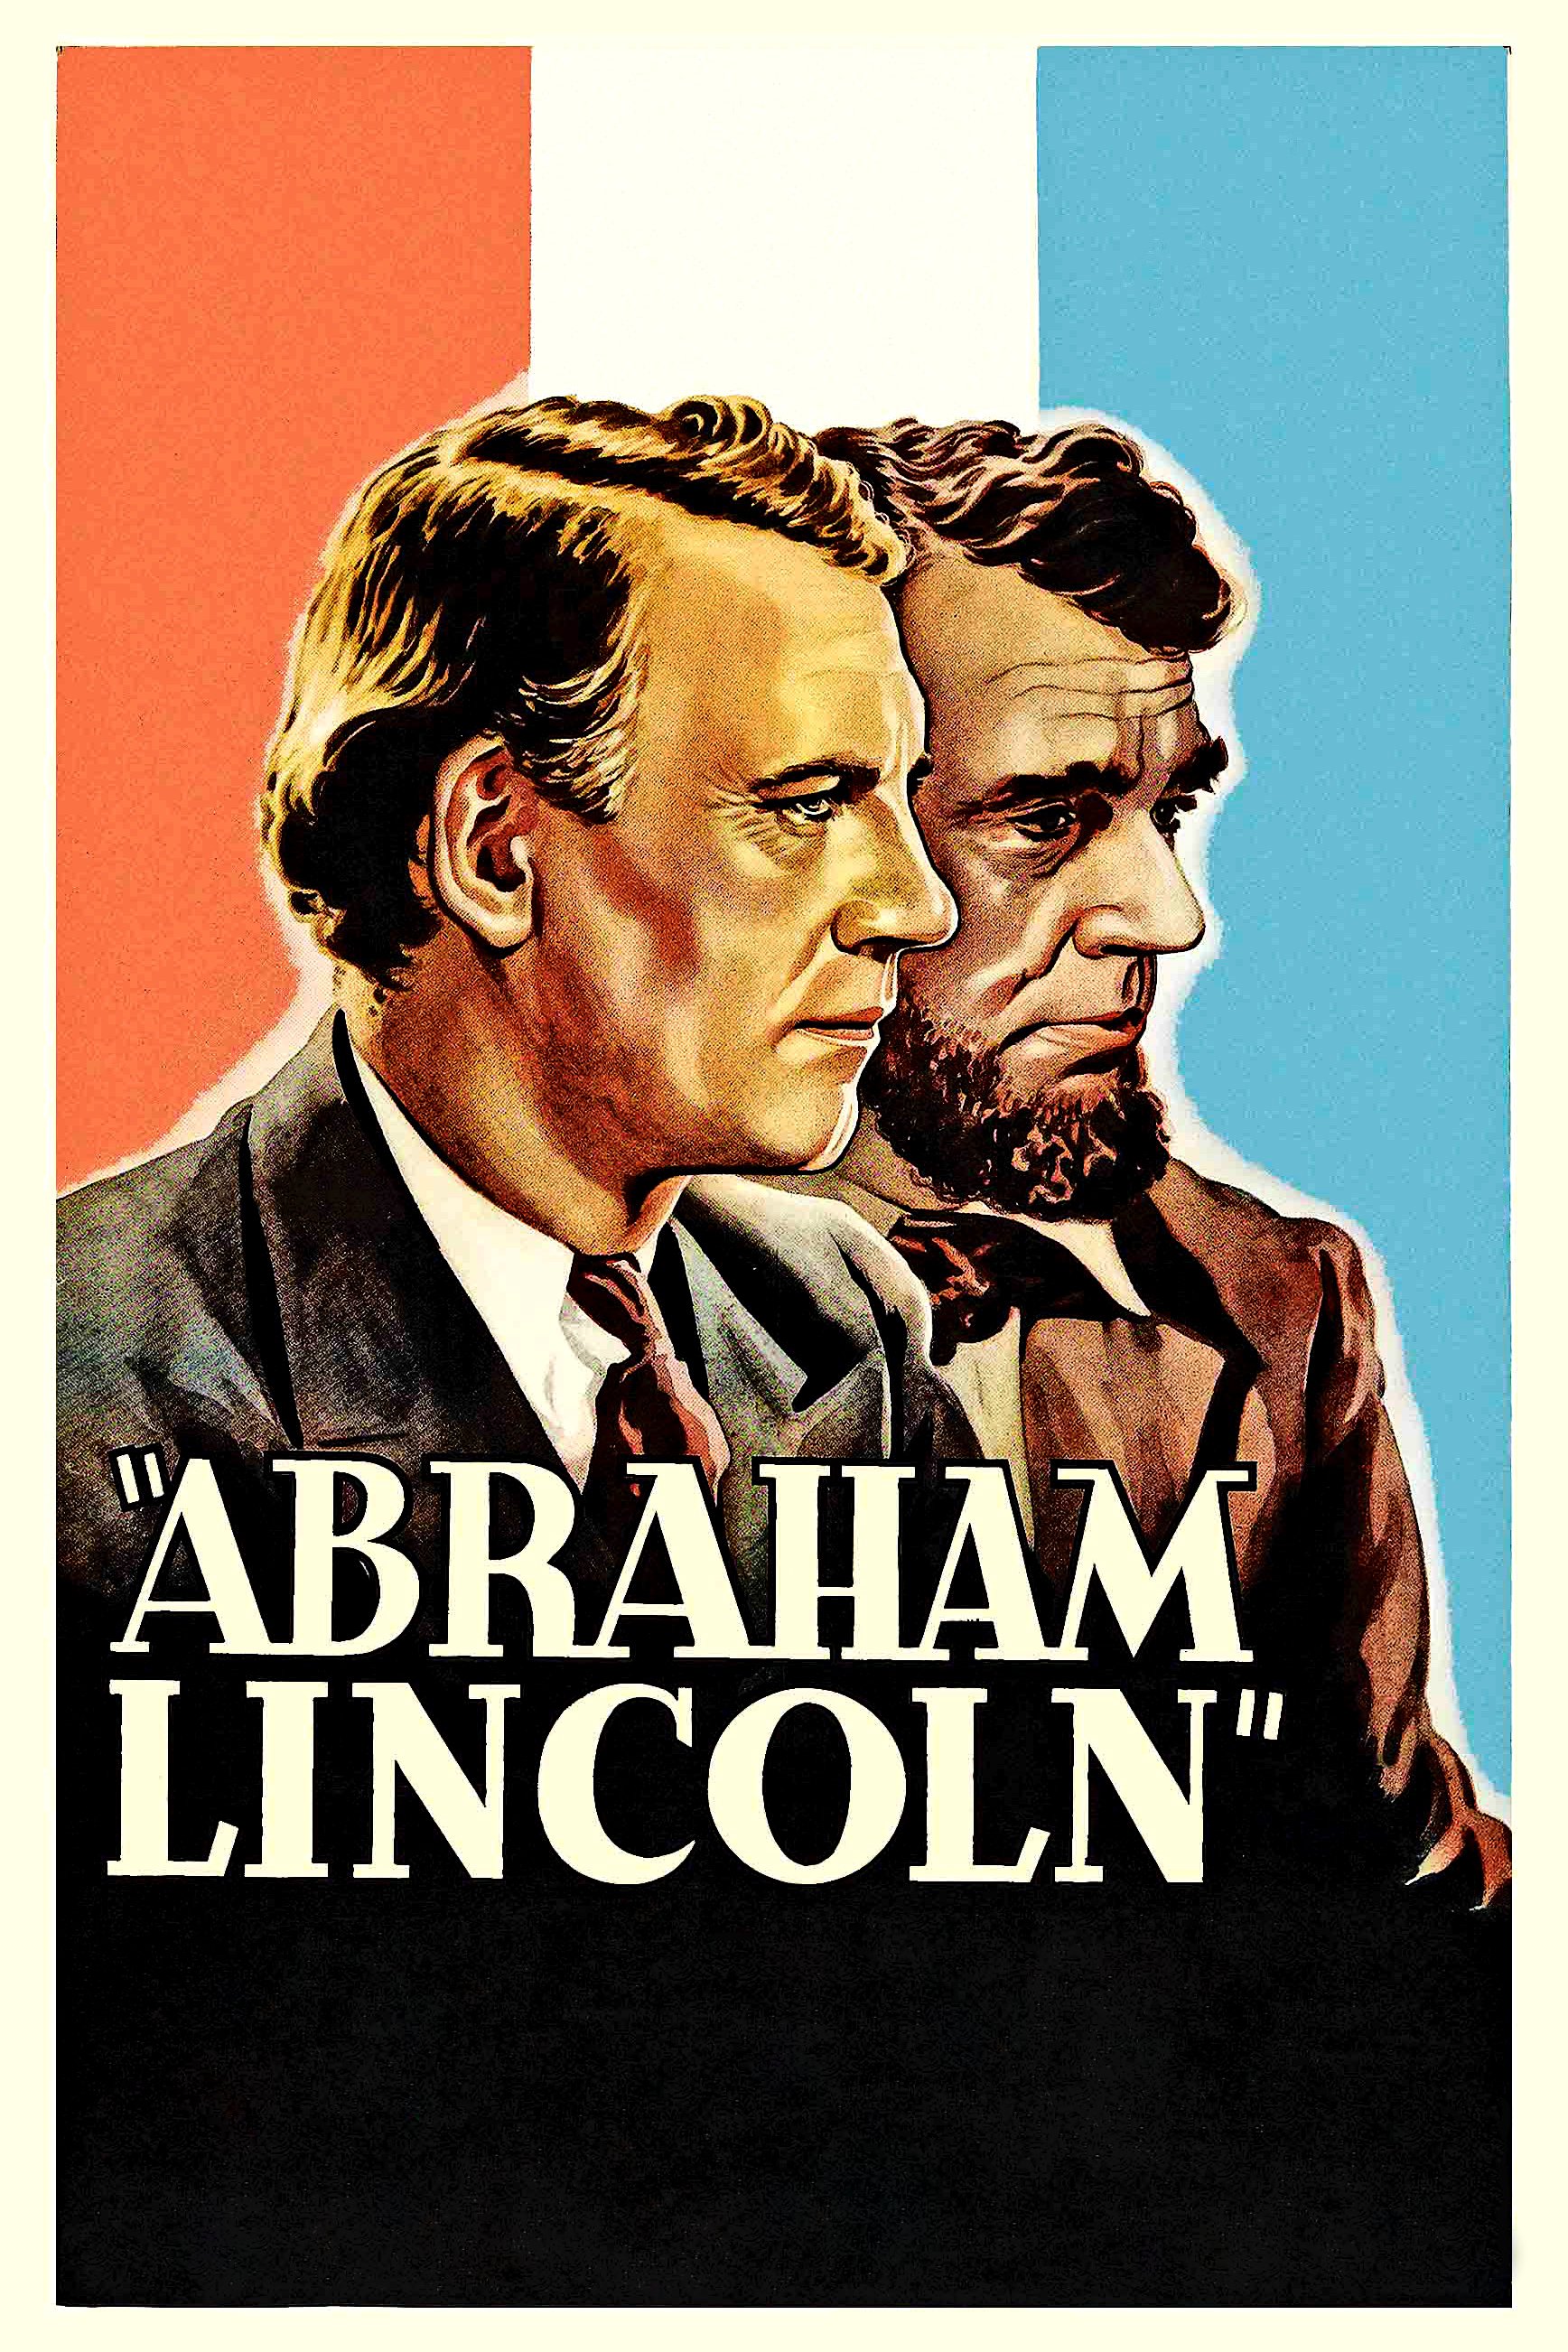 Poster for the movie "Abraham Lincoln"